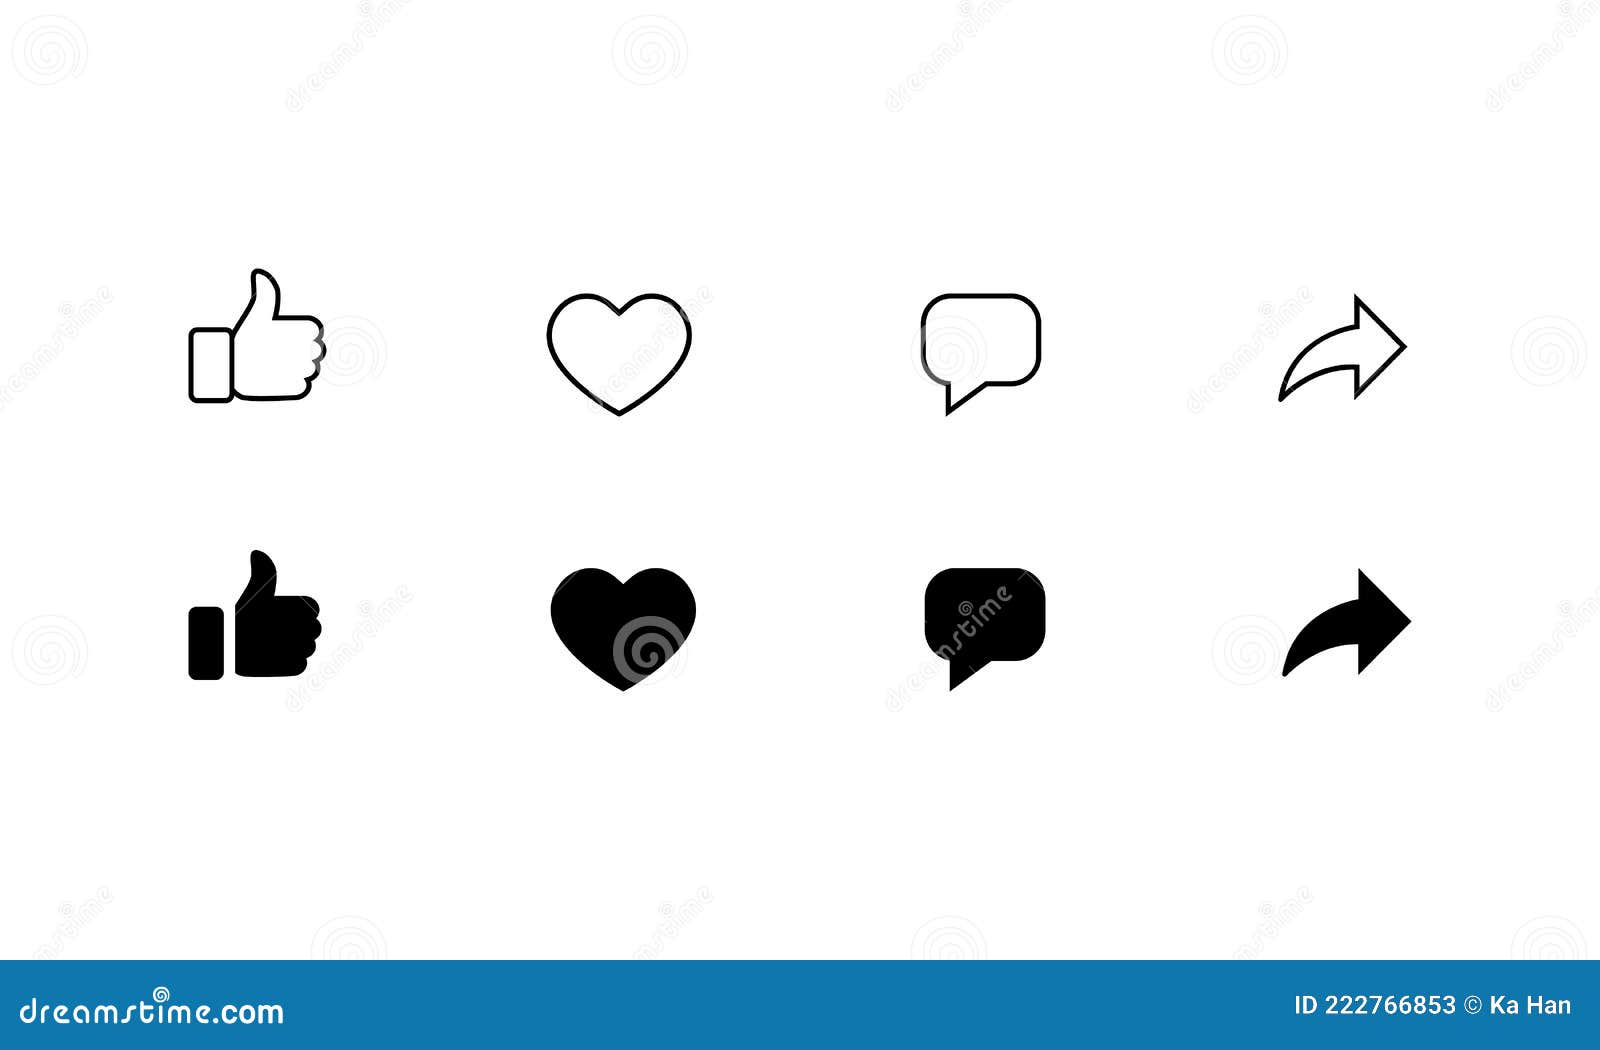 Like, Love, Comment, and Share. Icon Set of Social Media Elements Stock ...